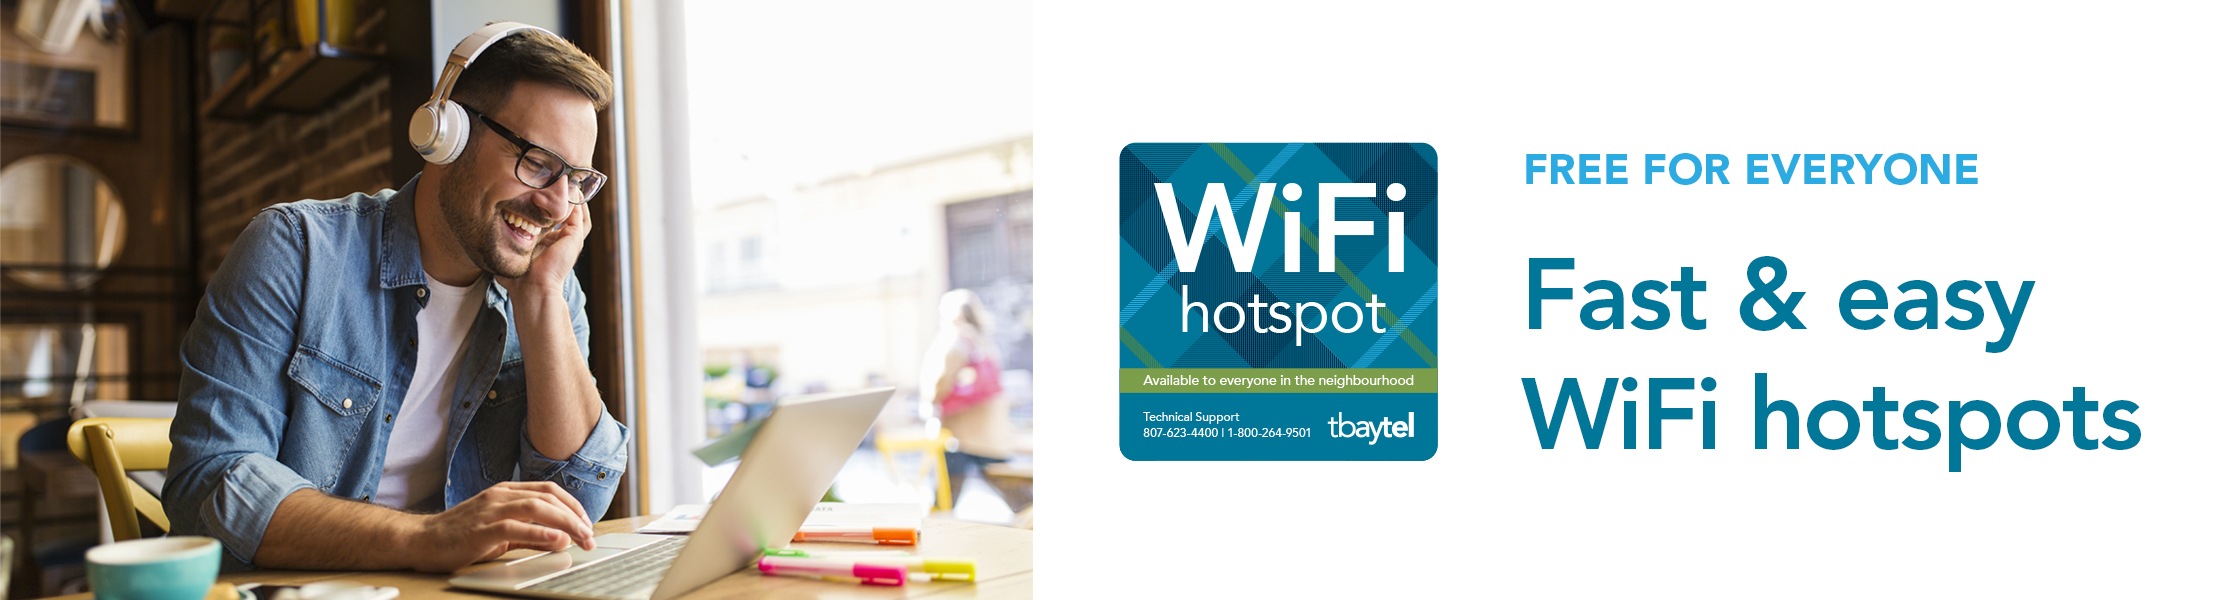 Fast and easy wifi hotspots